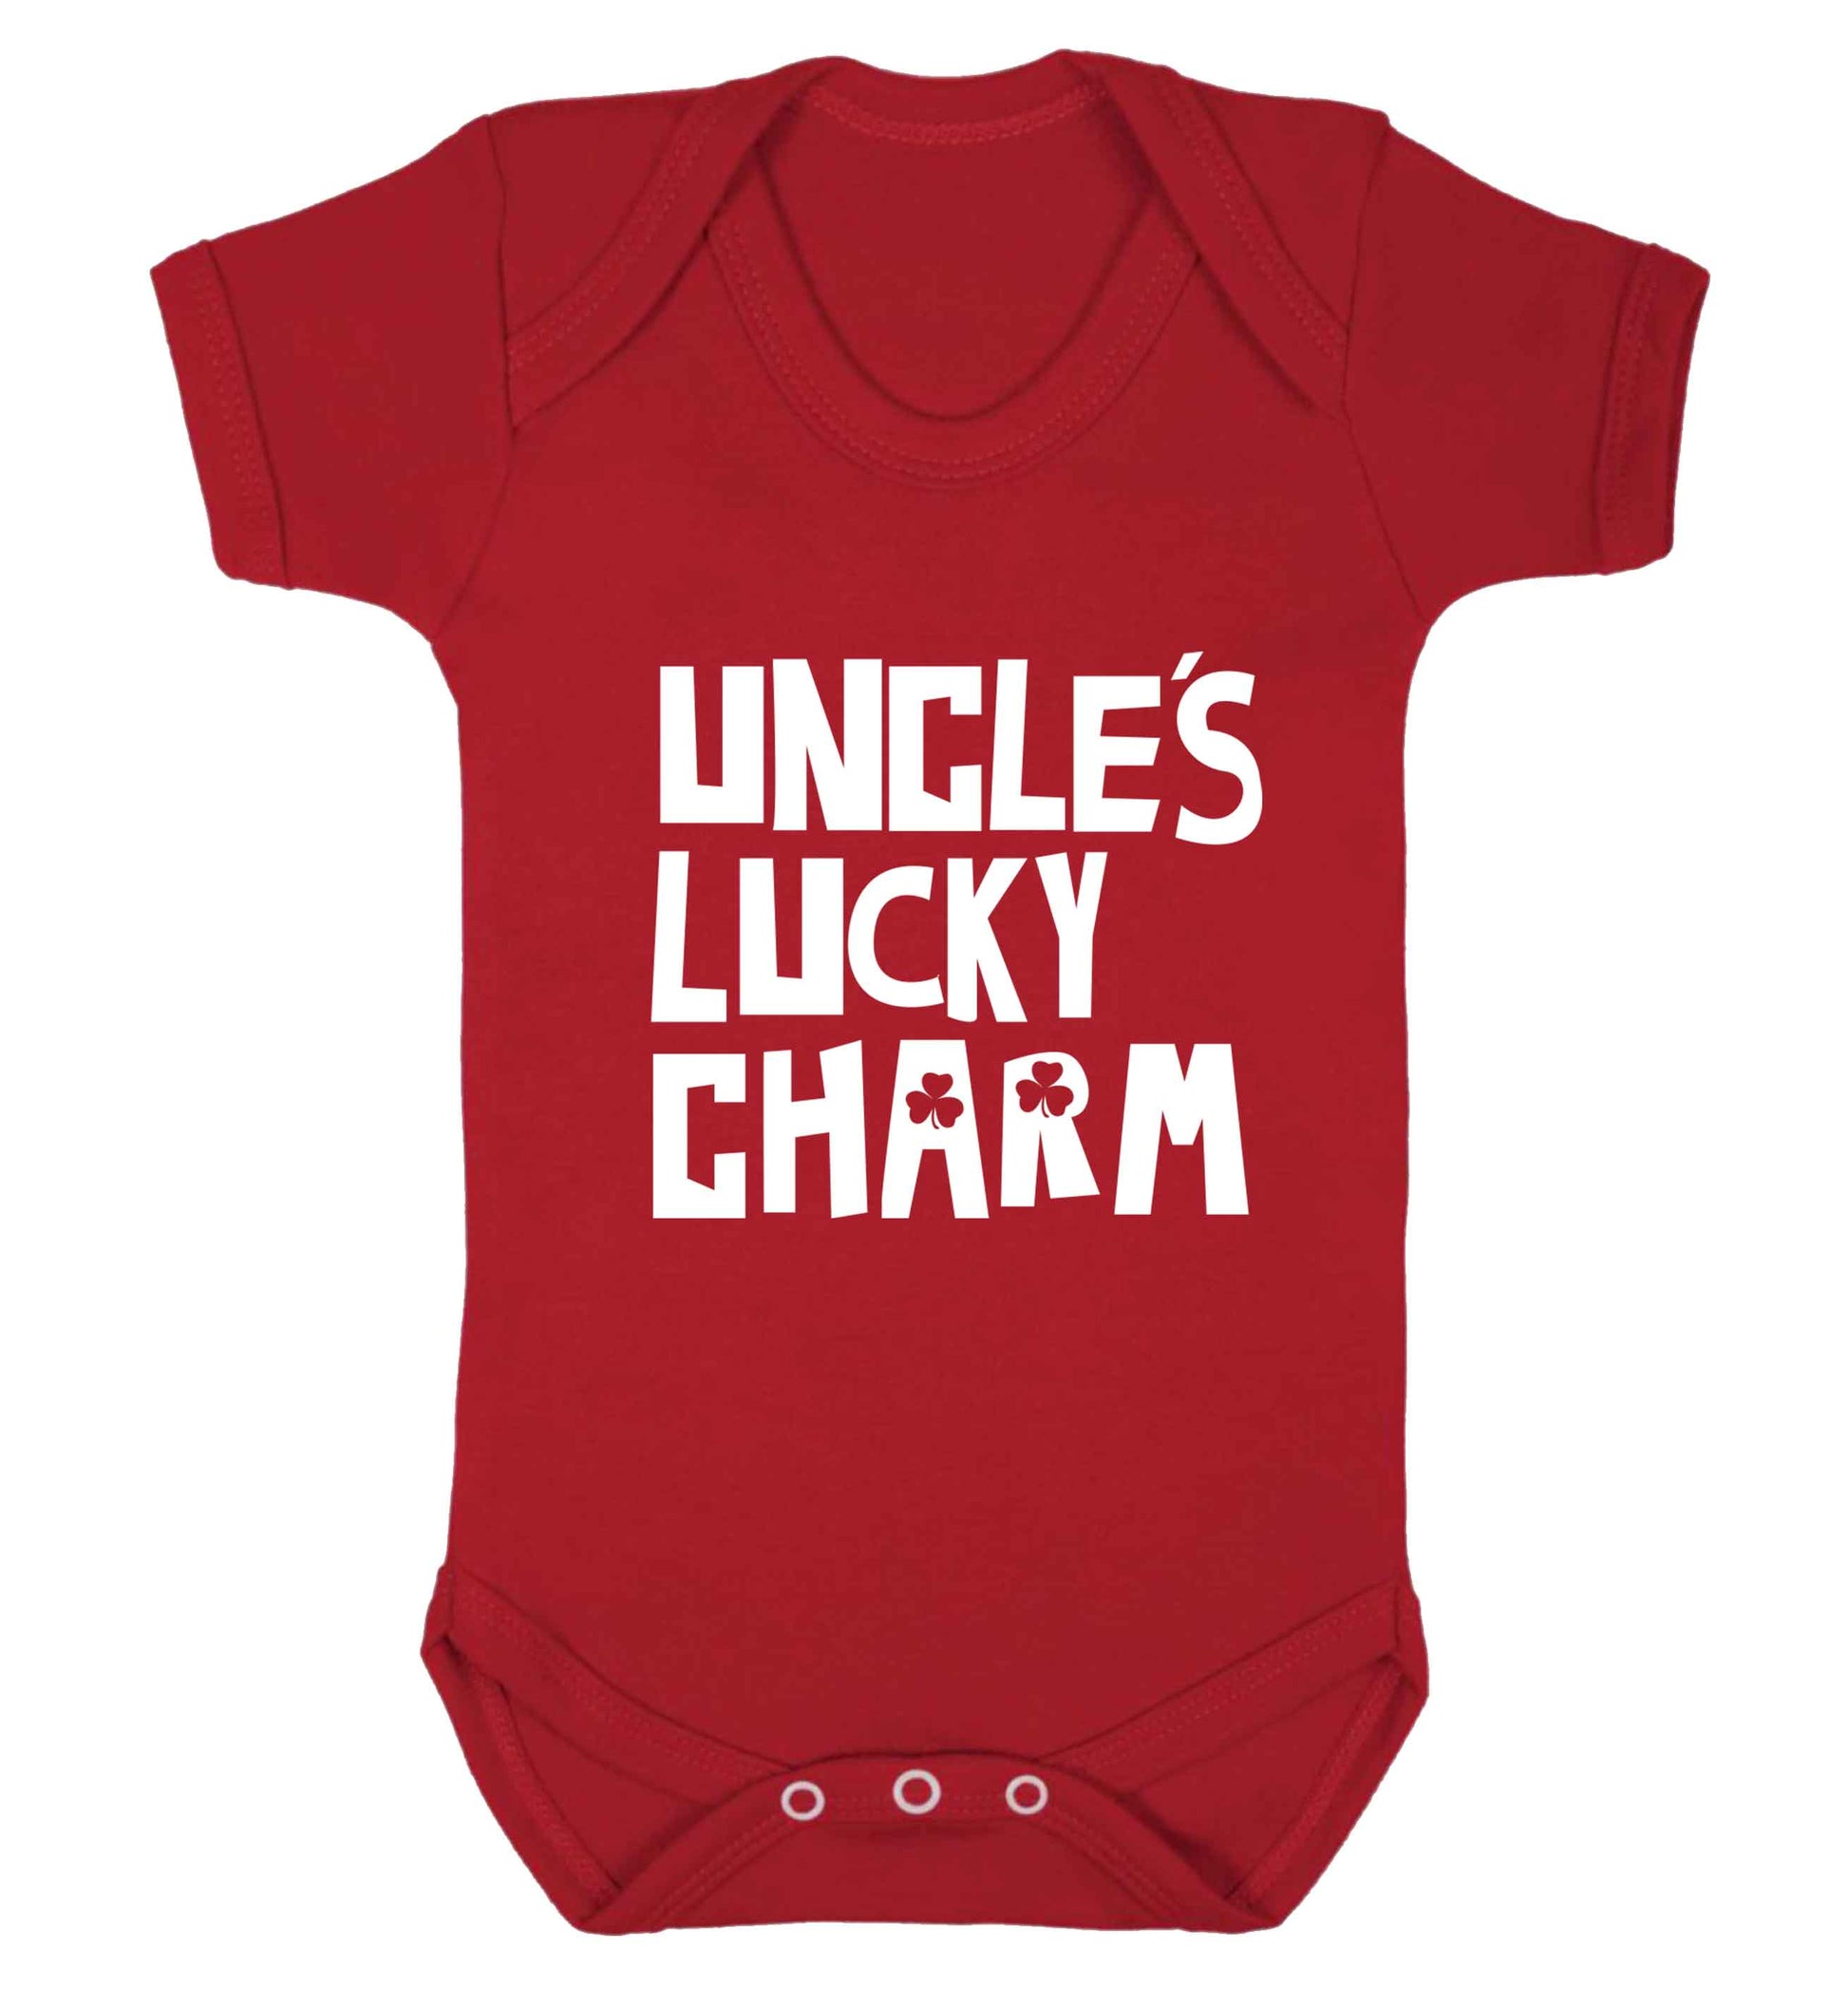 Uncles lucky charm baby vest red 18-24 months